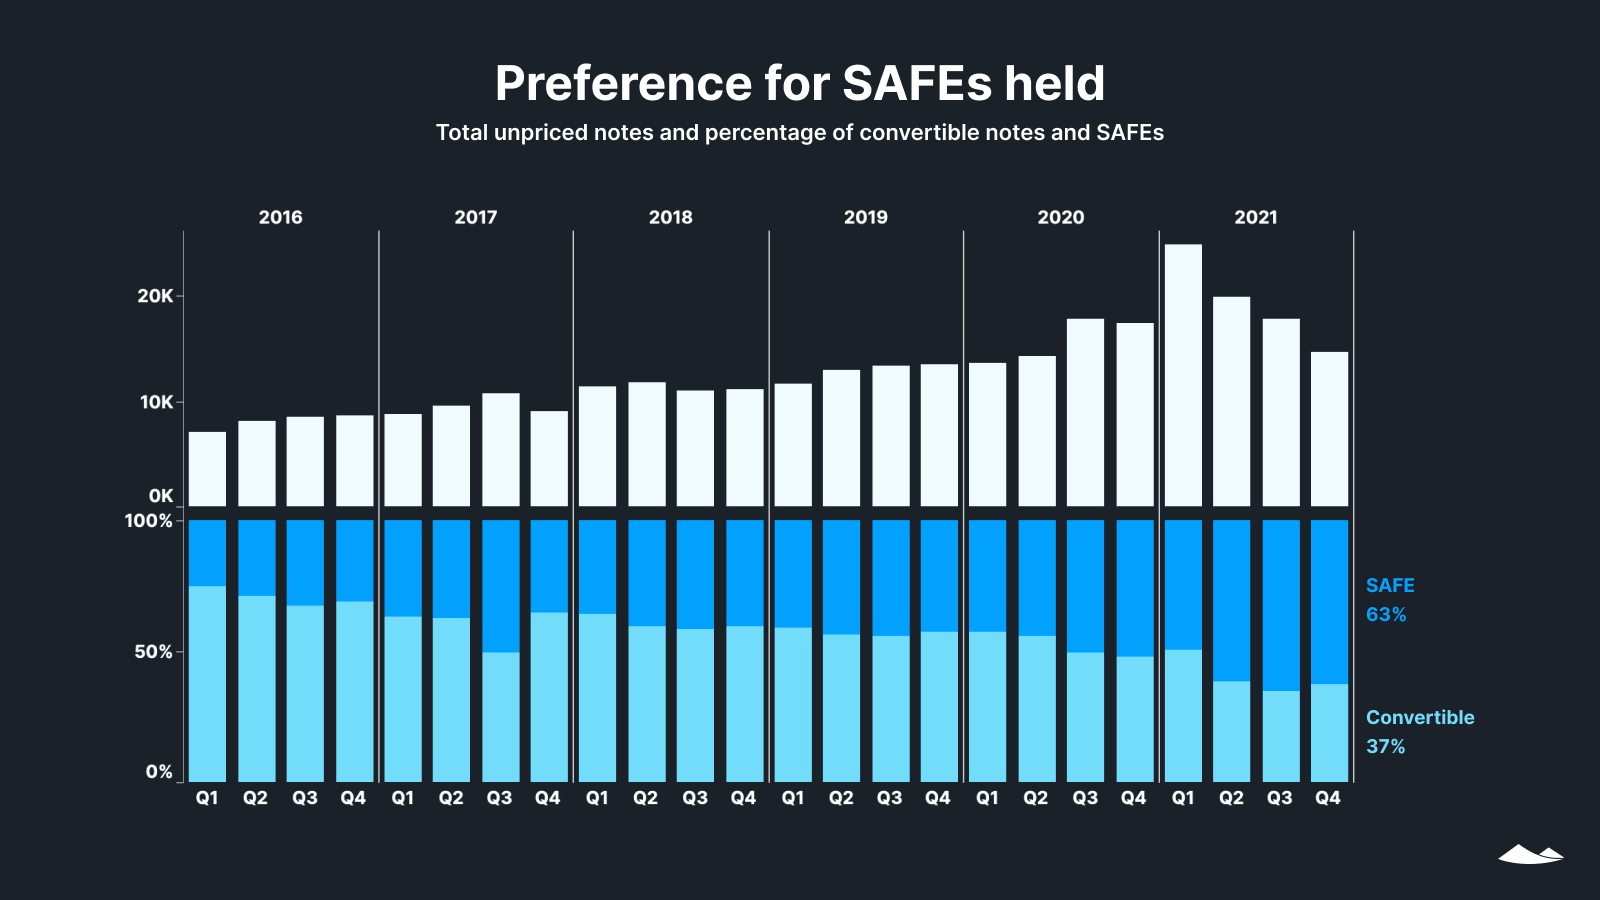 Preference for SAFEs held: Total unpriced notes and percentage of convertible notes and SAFEs by quarter, 2016-21.